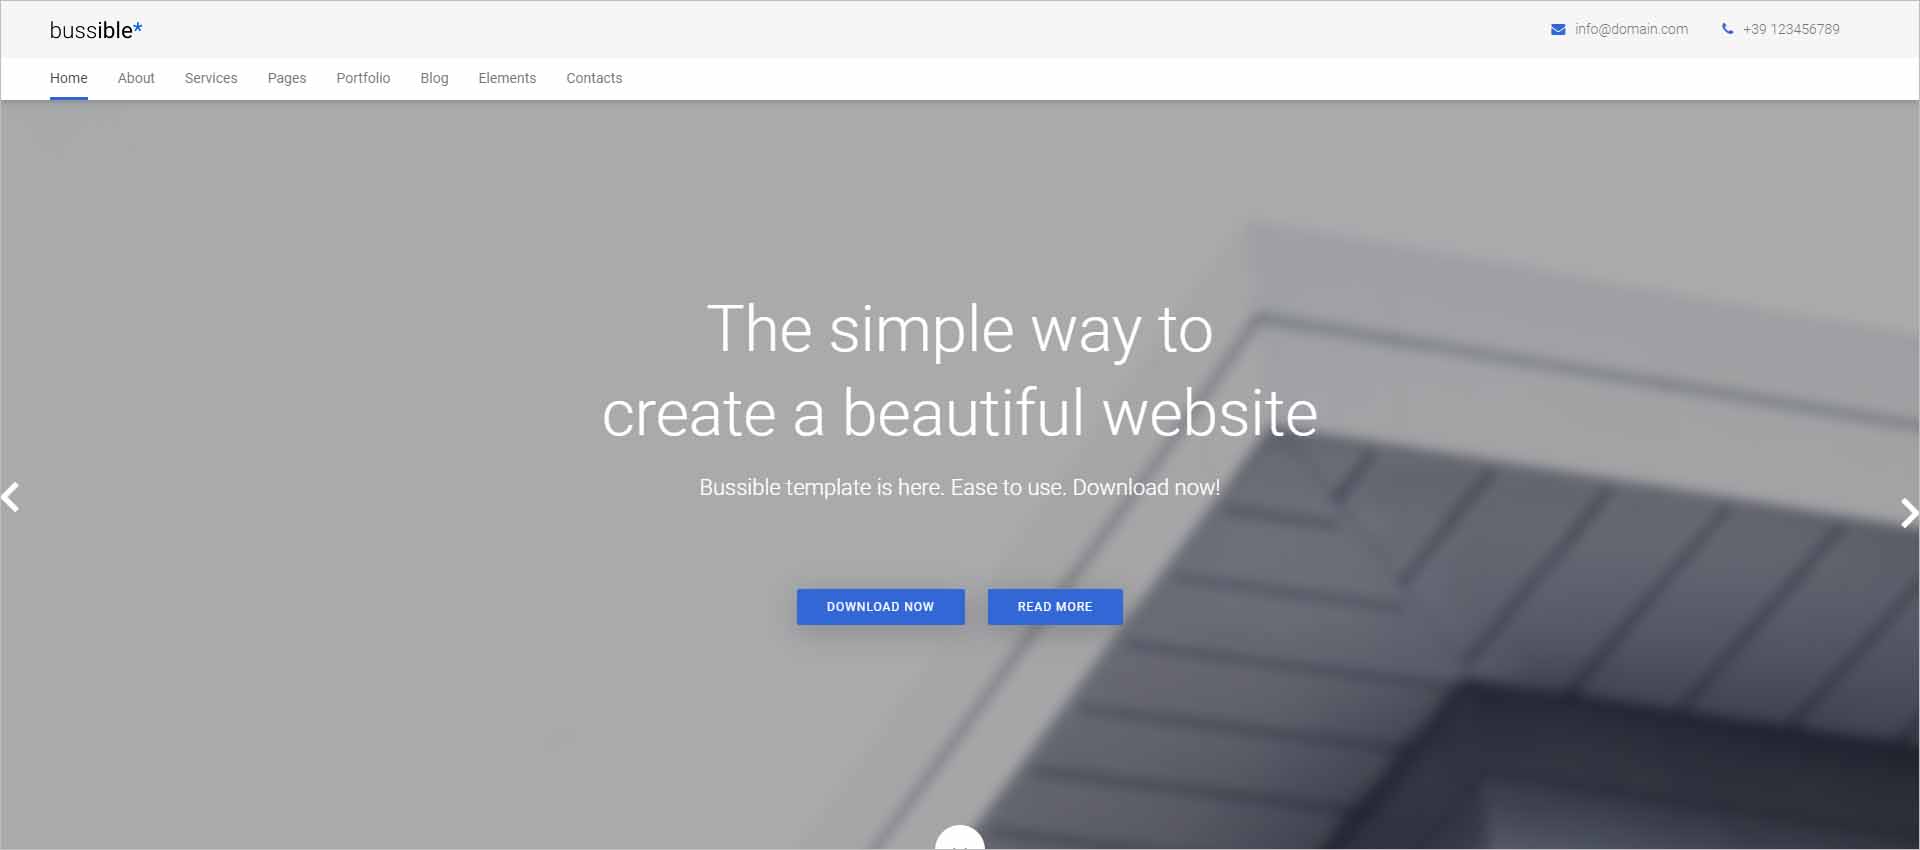 Bussible Startup Joomla Template